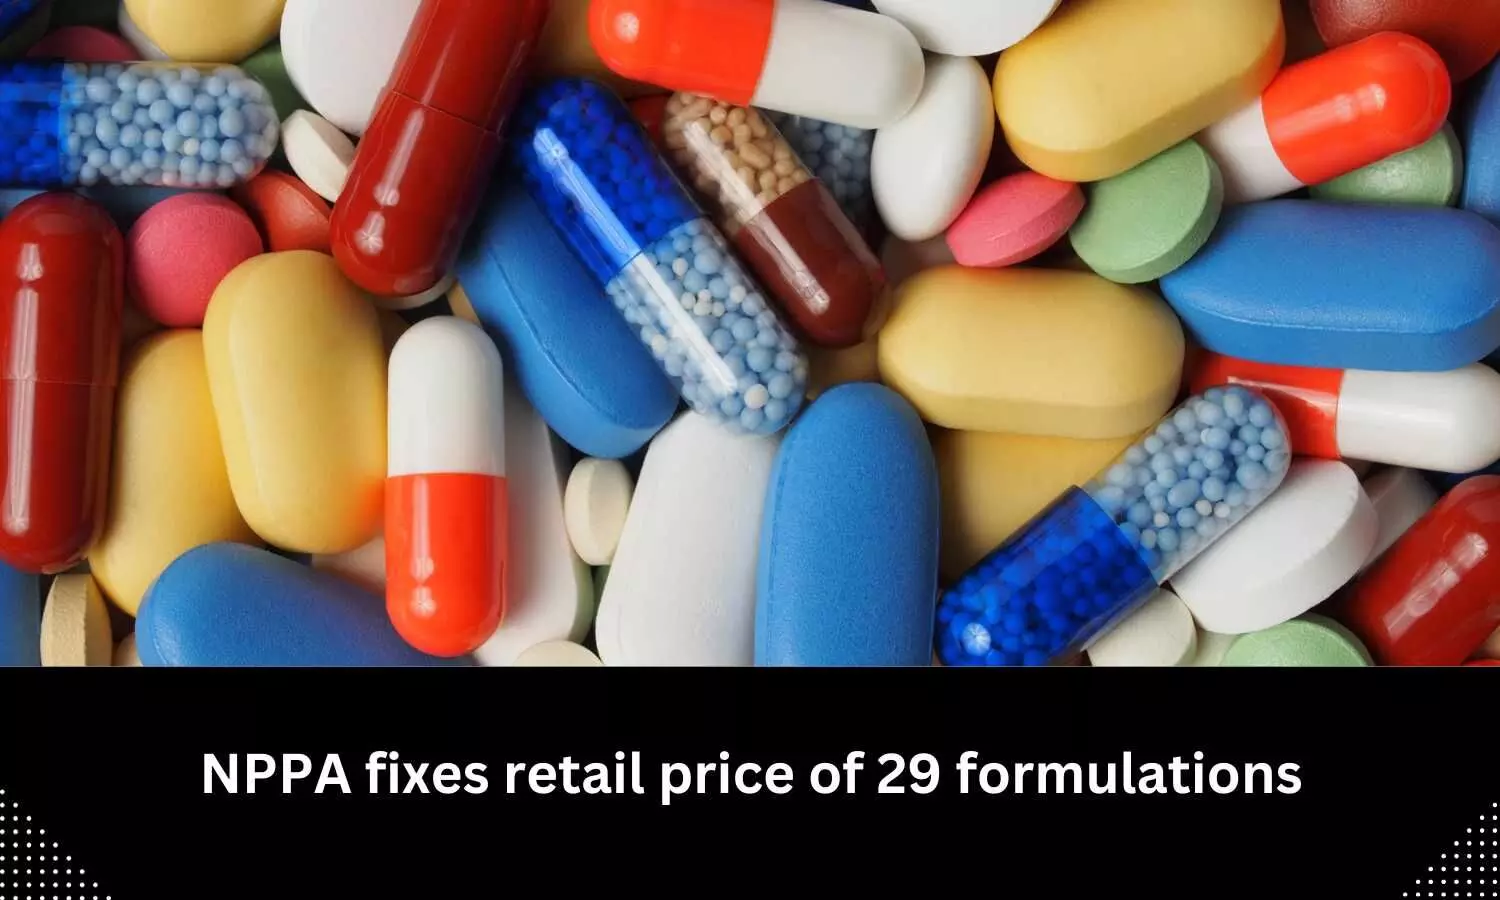 Retail price of 29 formulations fixed by NPPA